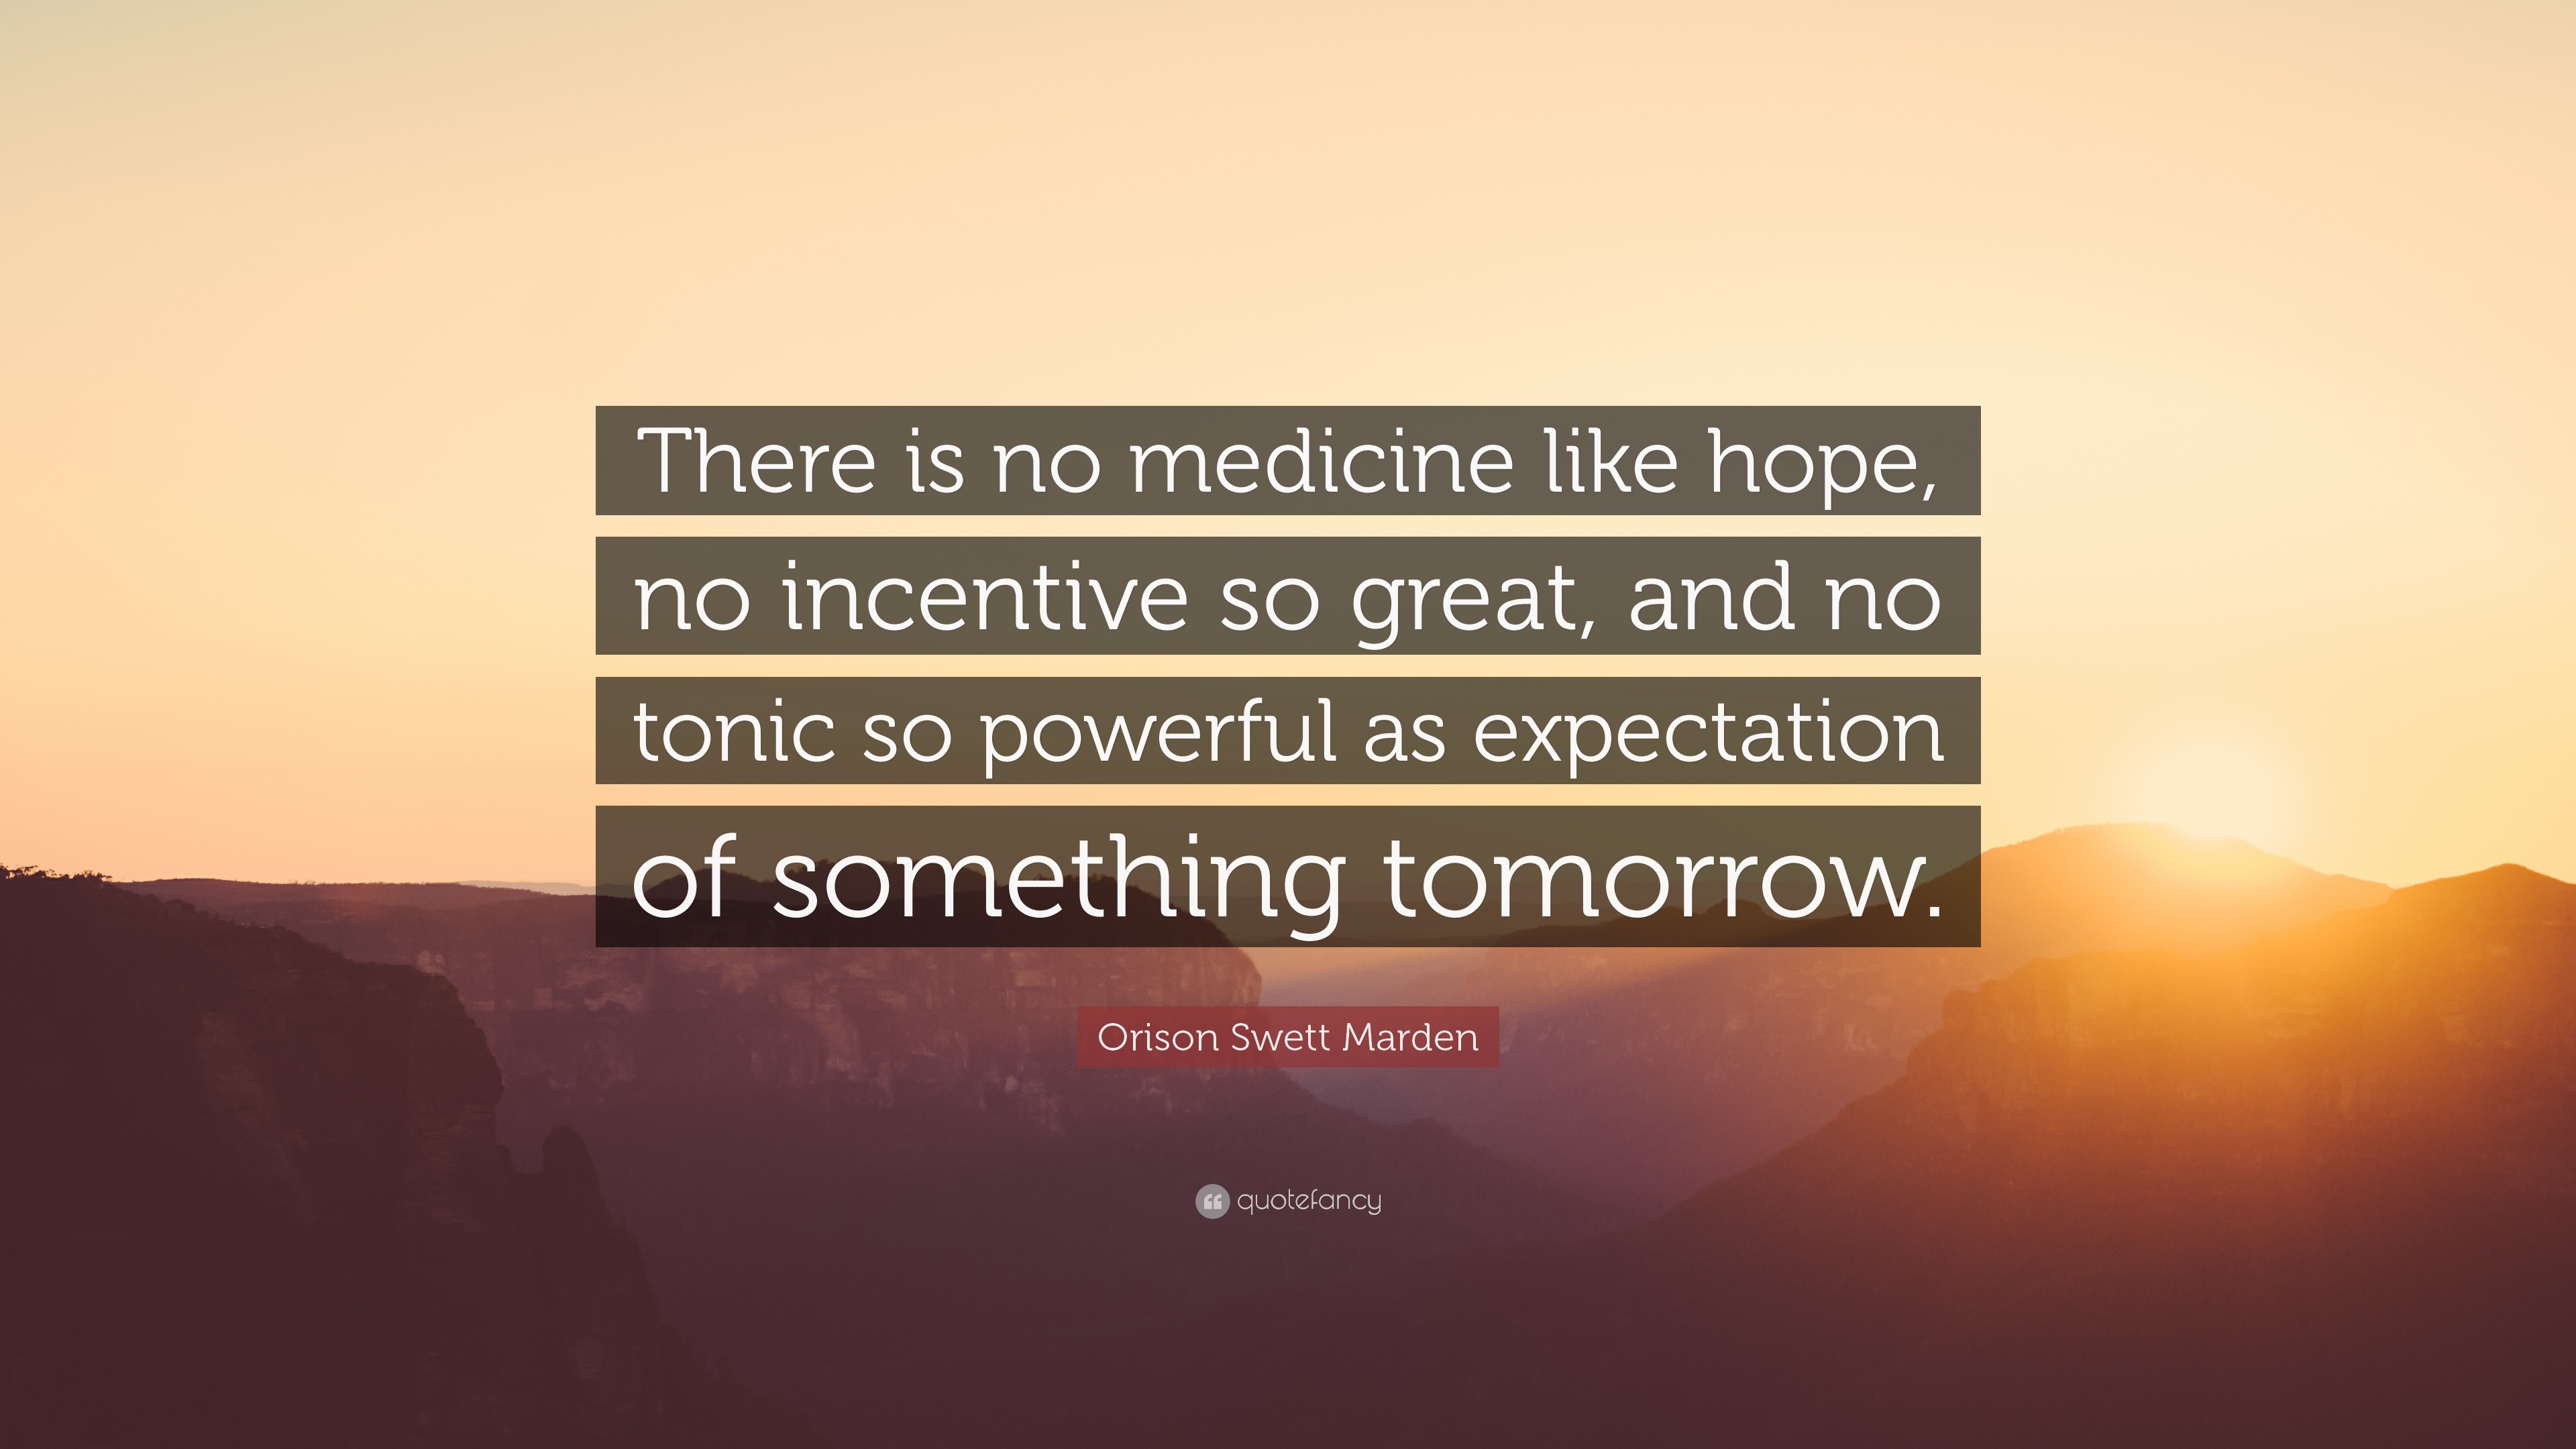 famous quotes about hope